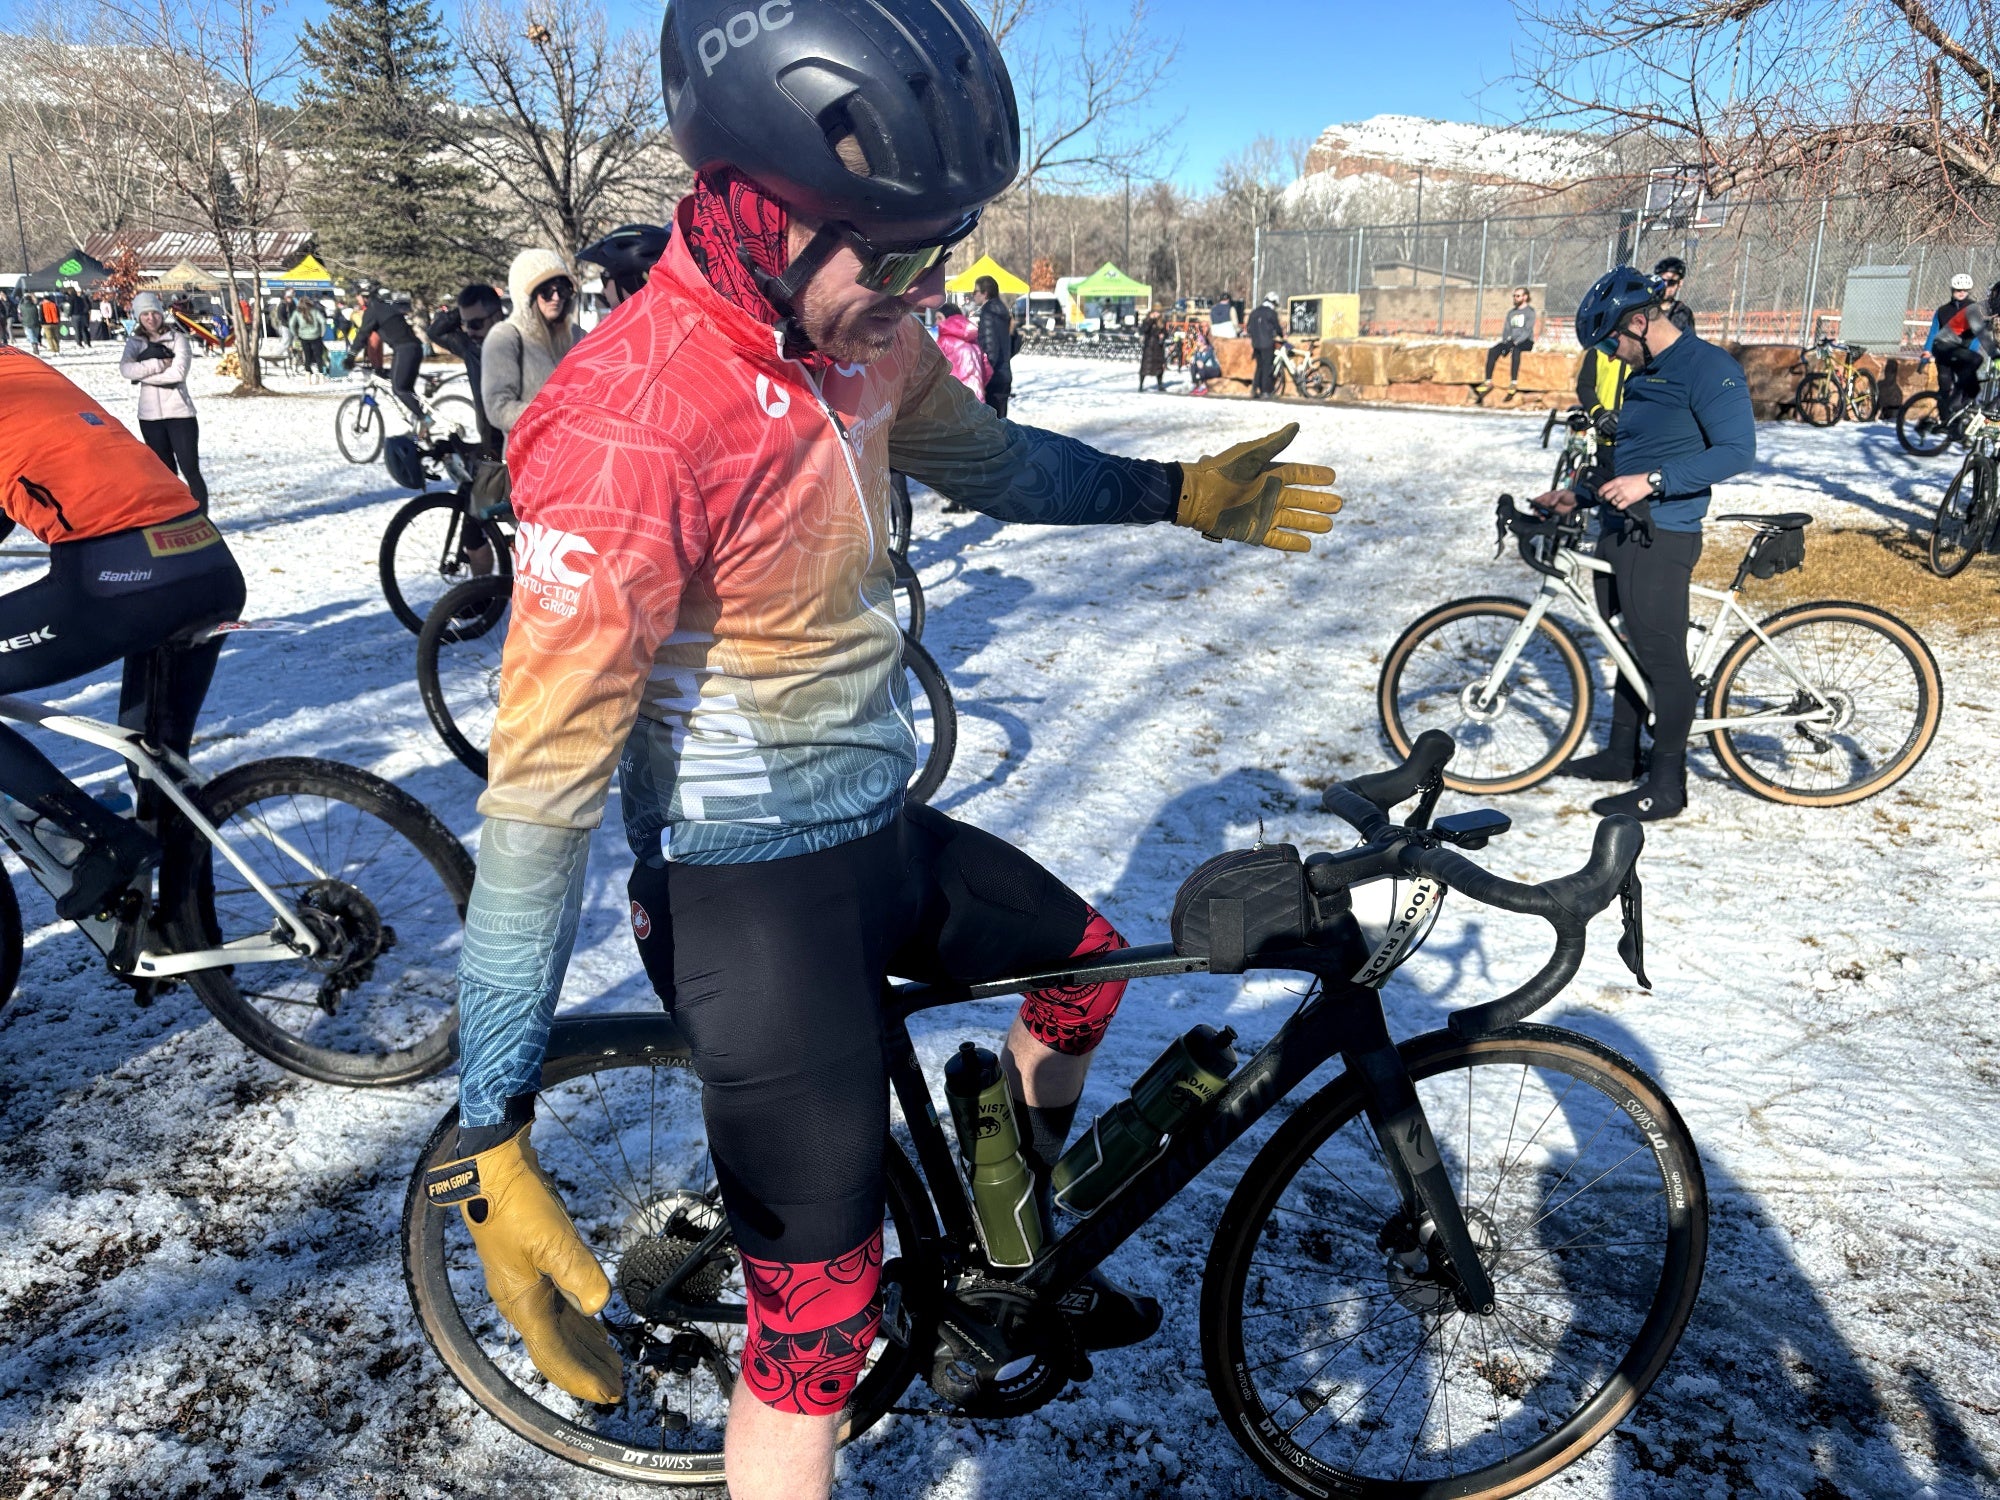 Specialized Roubaix "gravel" bike at old man winter